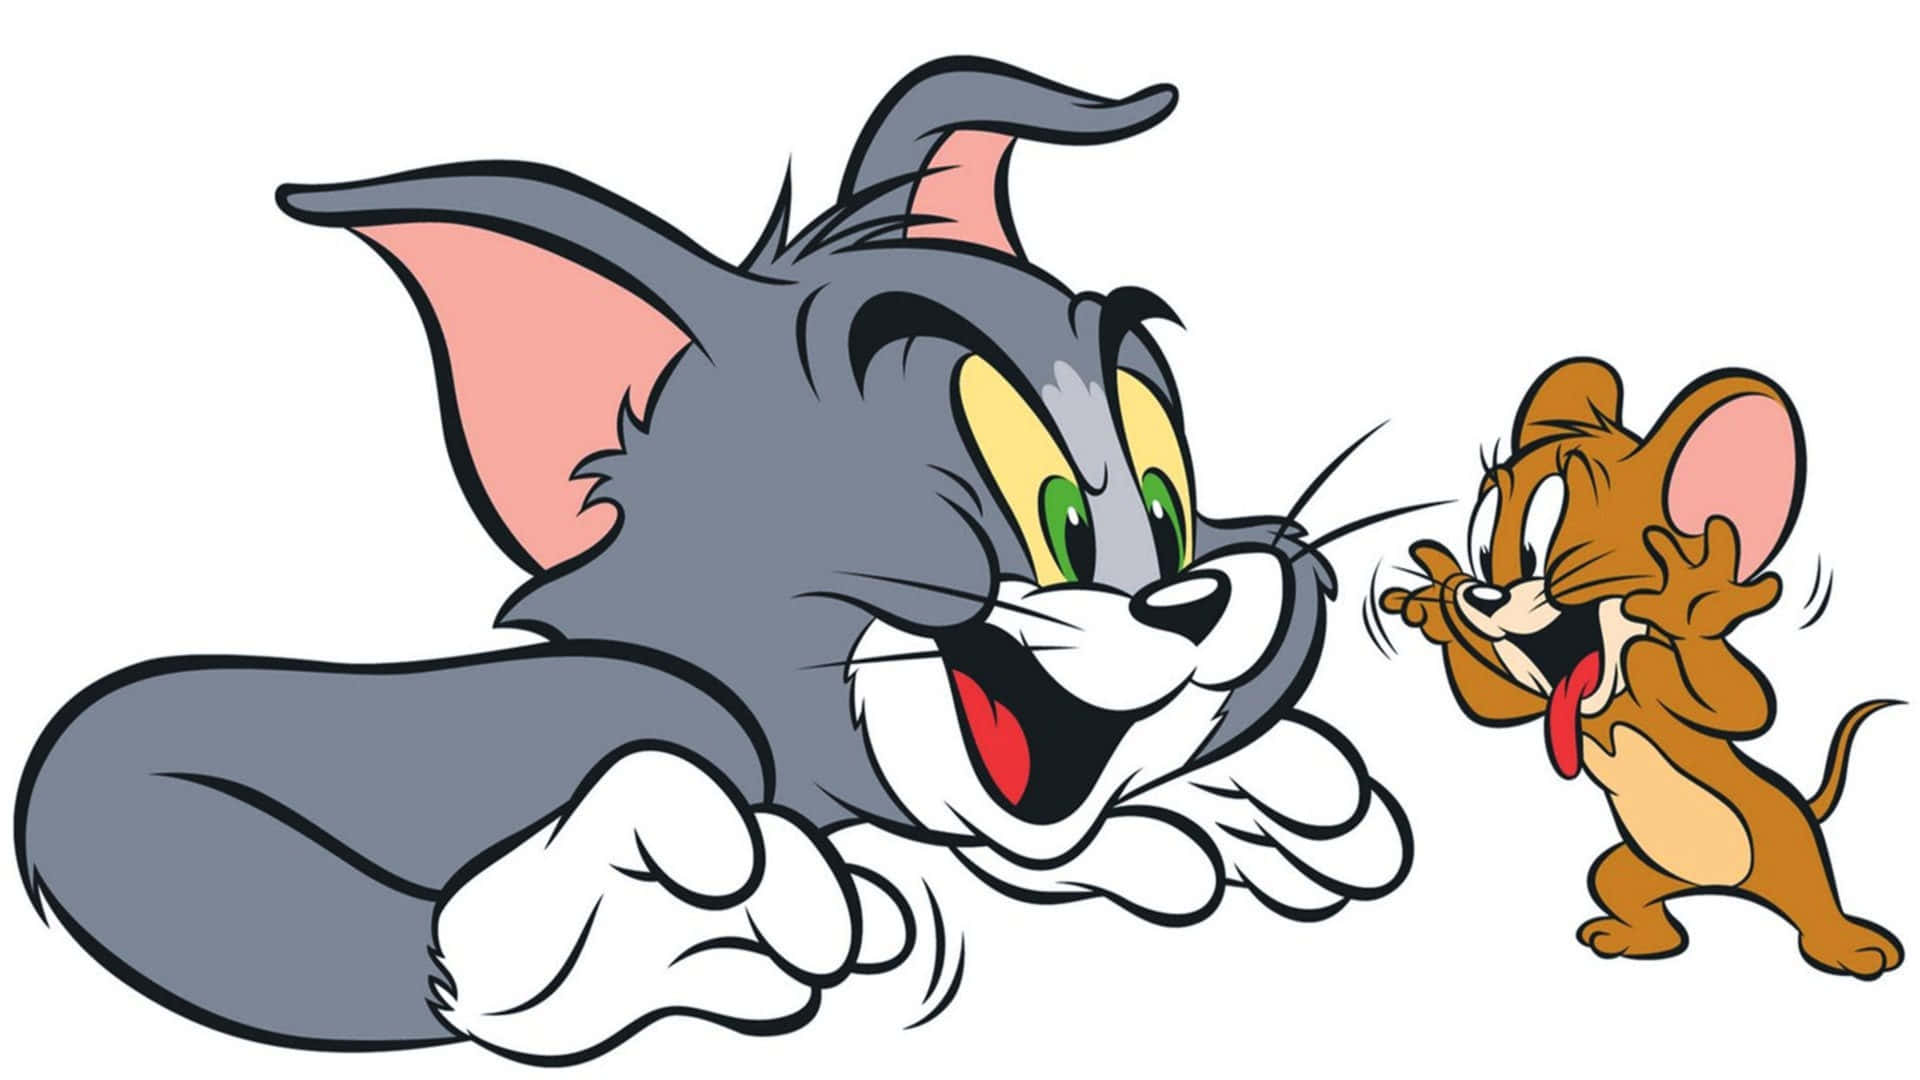 Two of the Funniest Cartoon Characters - Tom and Jerry Wallpaper